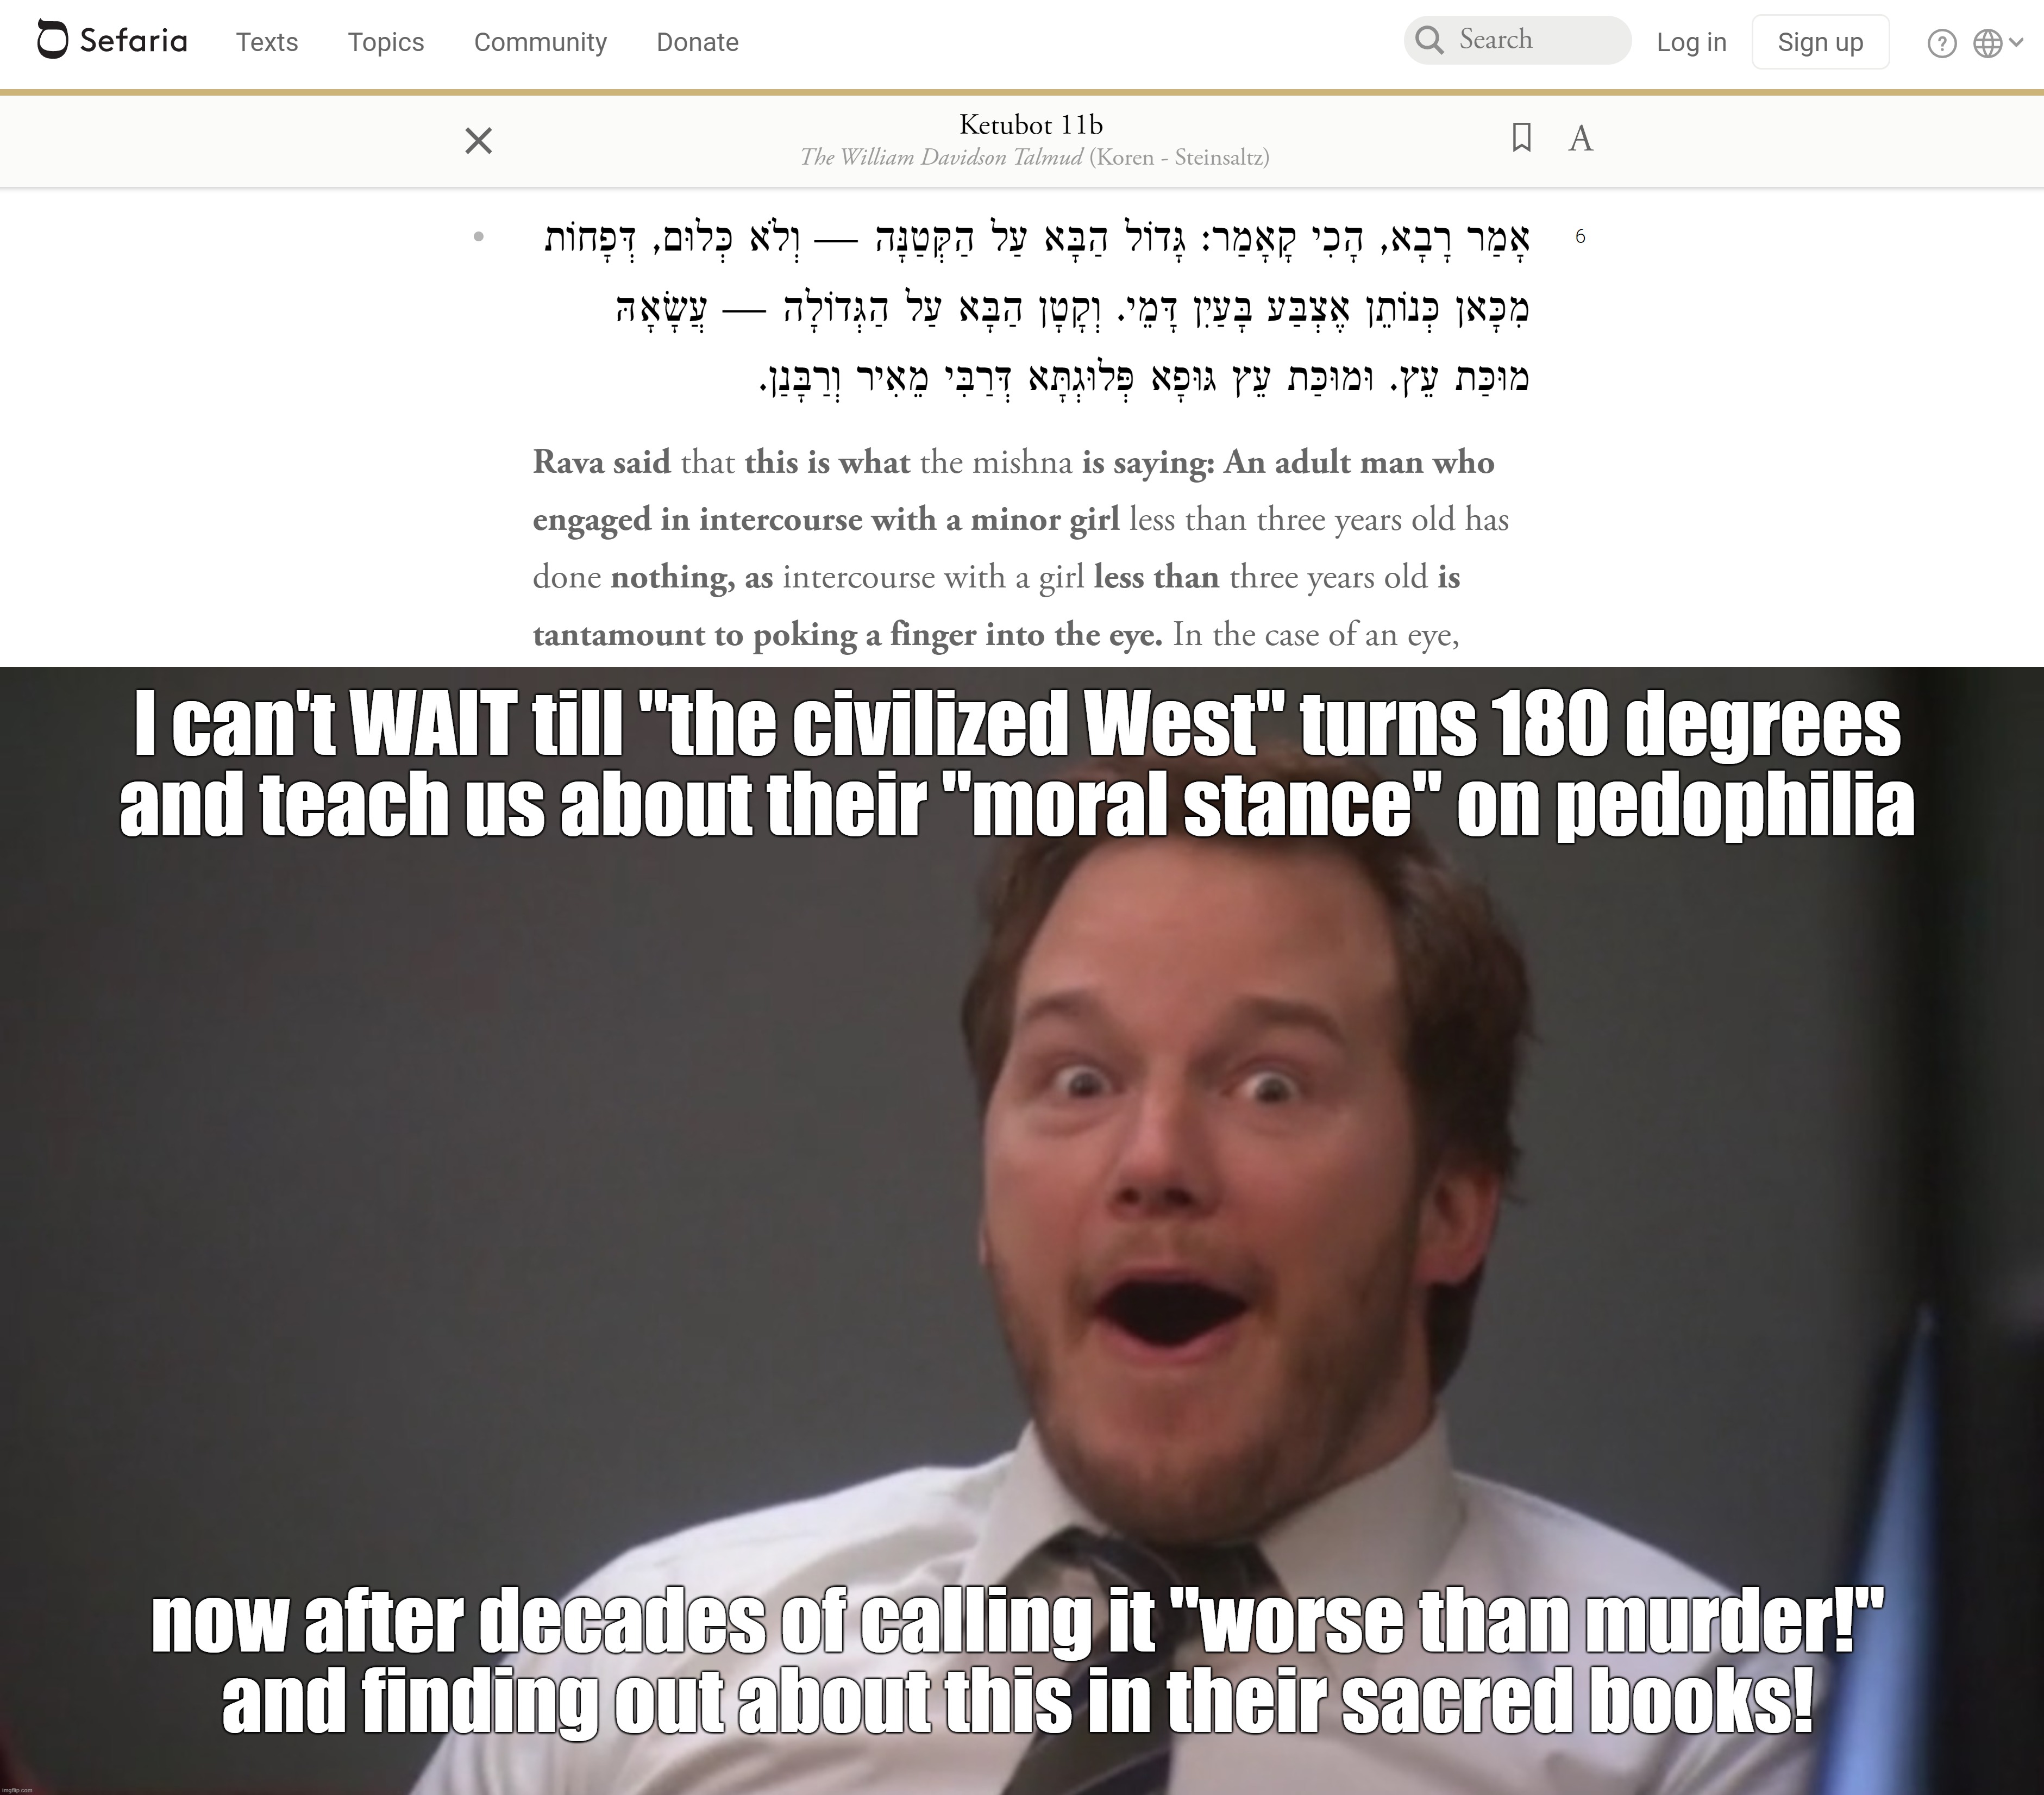 Can't WAIT Till "the Civilized West" Teach Us its "Morals" on Pedophilia Now After Finding Out About This in Their Sacred Books! | I can't WAIT till "the civilized West" turns 180 degrees
and teach us about their "moral stance" on pedophilia now after decades of calling  | image tagged in andy dwyer,judaism,jews,pedophile,pedophiles,the civilized west | made w/ Imgflip meme maker